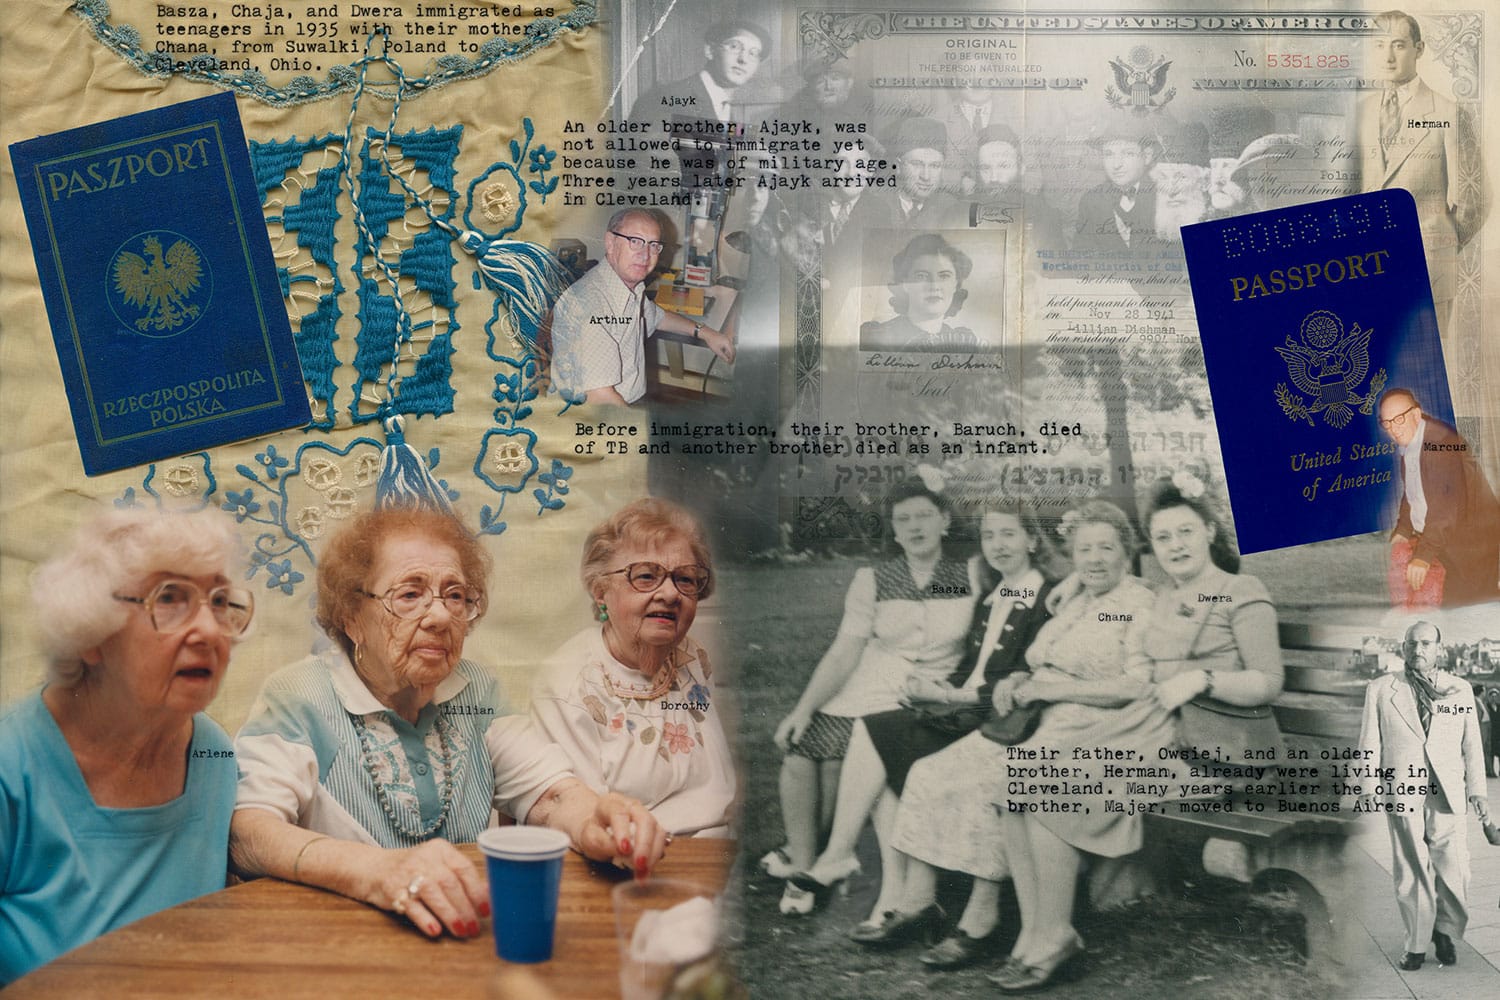 Collage including archival images, embroidery, and US passports